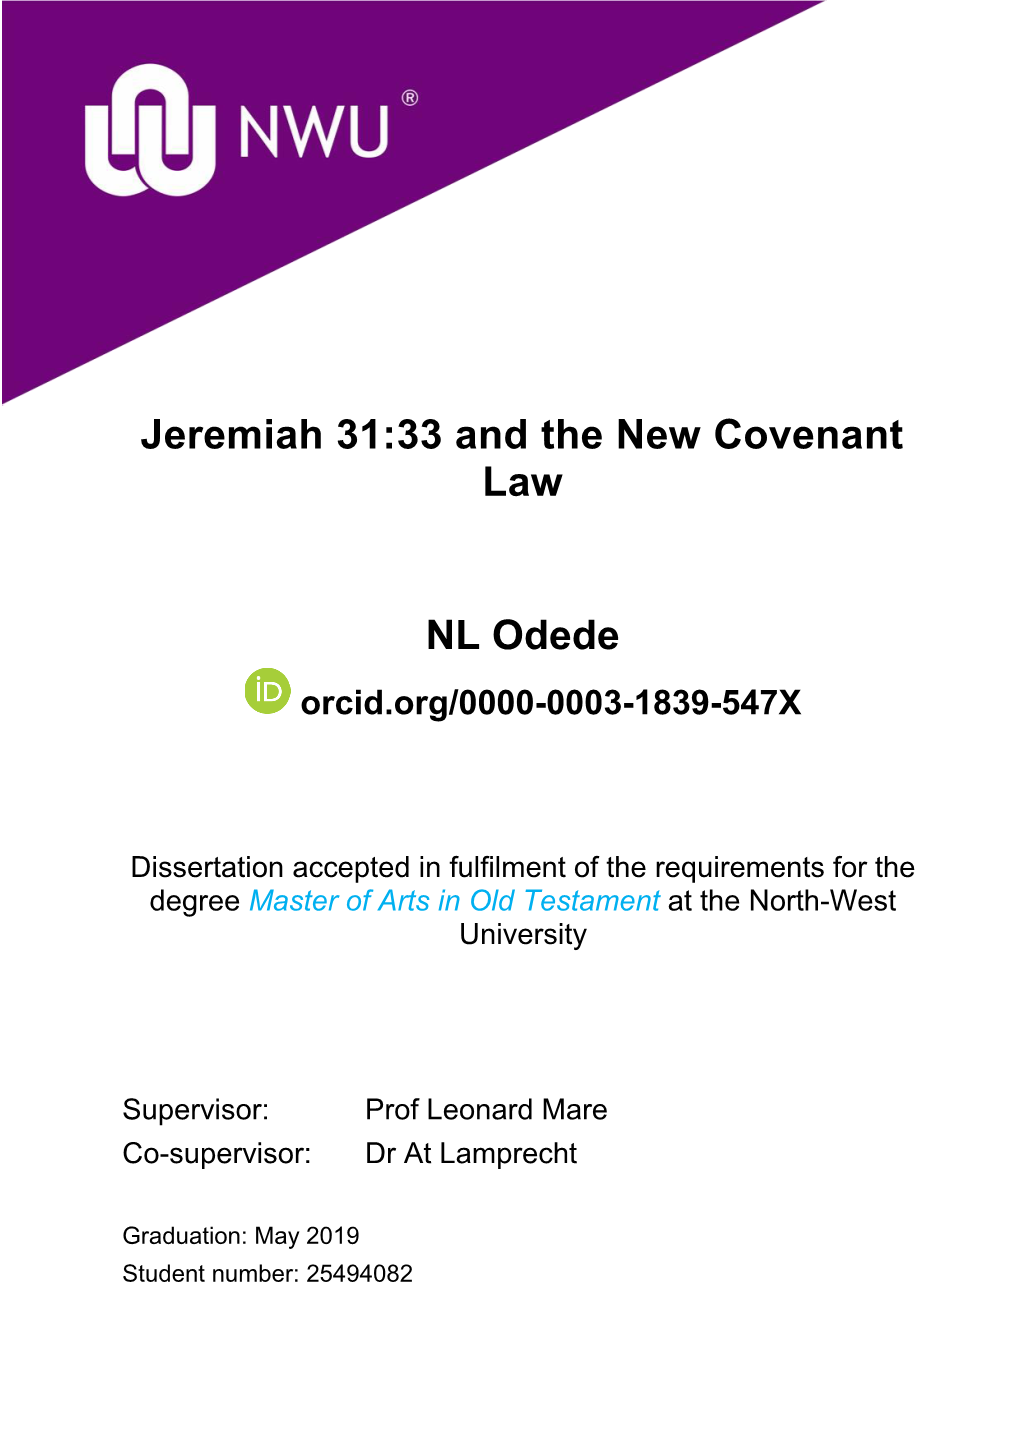 Jeremiah 31:33 and the New Covenant Law NL Odede